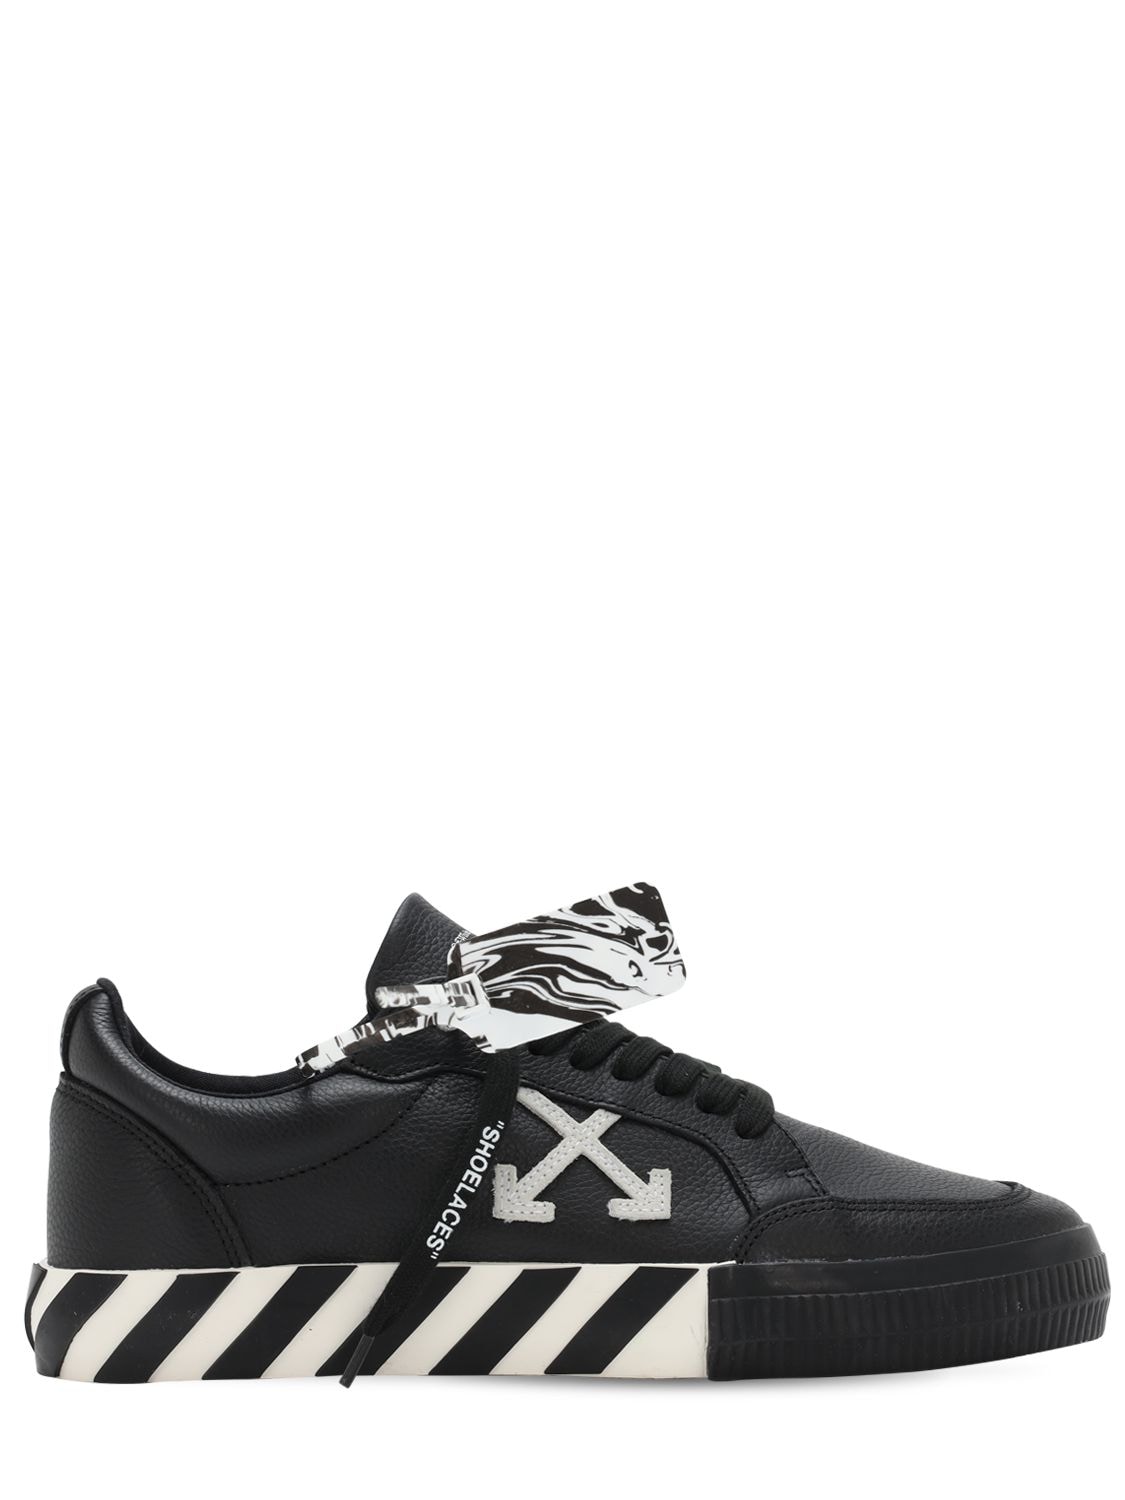 Off-White - Vulcanized leather low top sneakers - Black/White ...